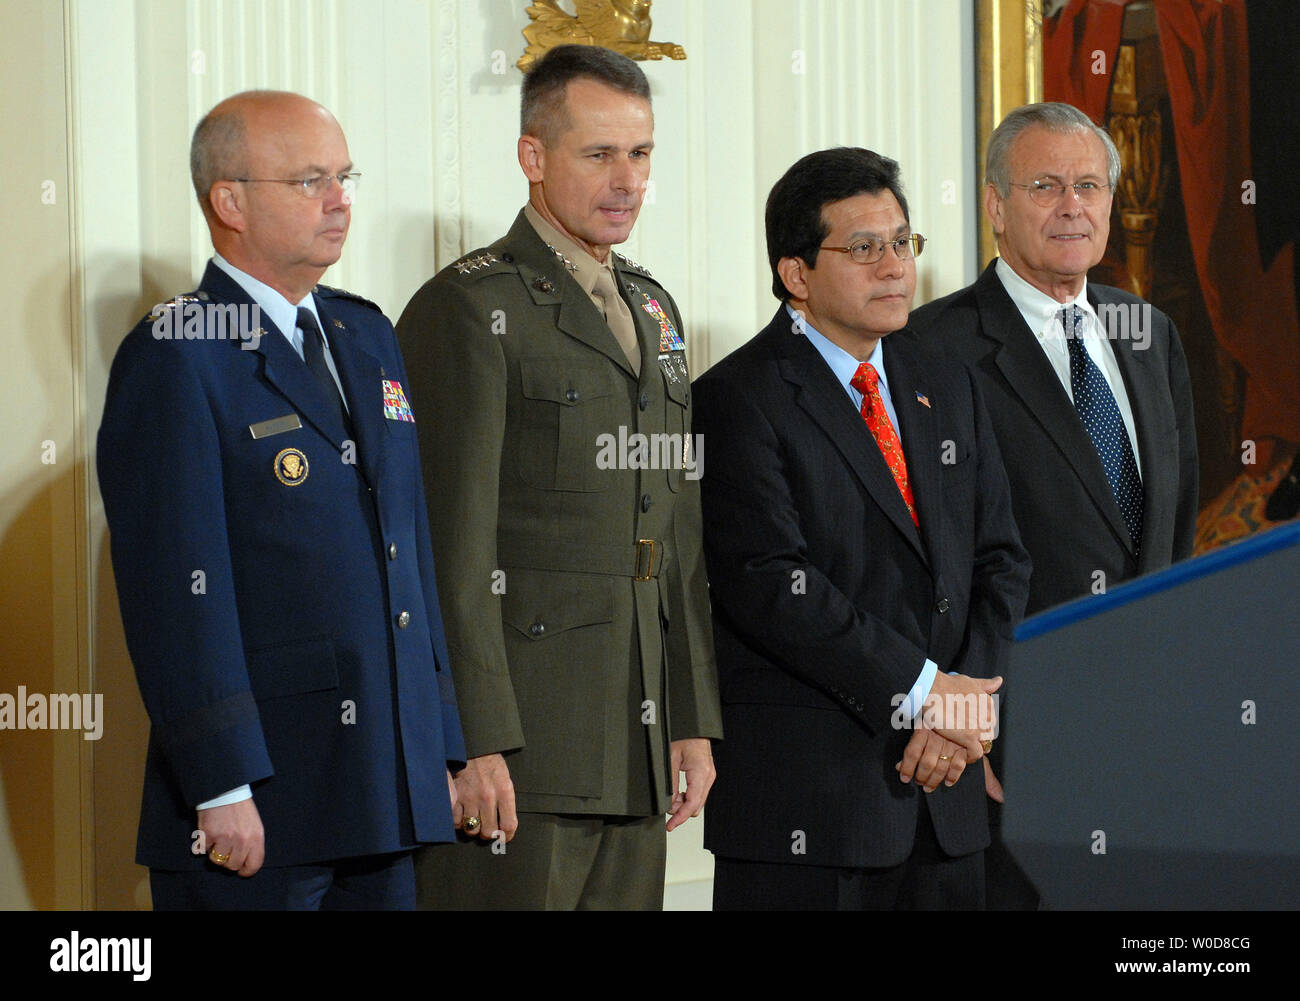 CIA Director Michael Hayden, Chairman of the Joint Chiefs of Staff Gen. Peter Pace, Att. Gen. Alberto Gonzales and Secretary of Defense Donald Rumsfeld (L to R) attend a ceremony to watch U.S. President George W. Bush sign S. 3930, the Military Commissions Act of 2006, a bill outlining the treatment of terrorism suspects, in the East Room of the White House on October 17, 2006.    (UPI Photo/Roger L. Wollenberg) Stock Photo